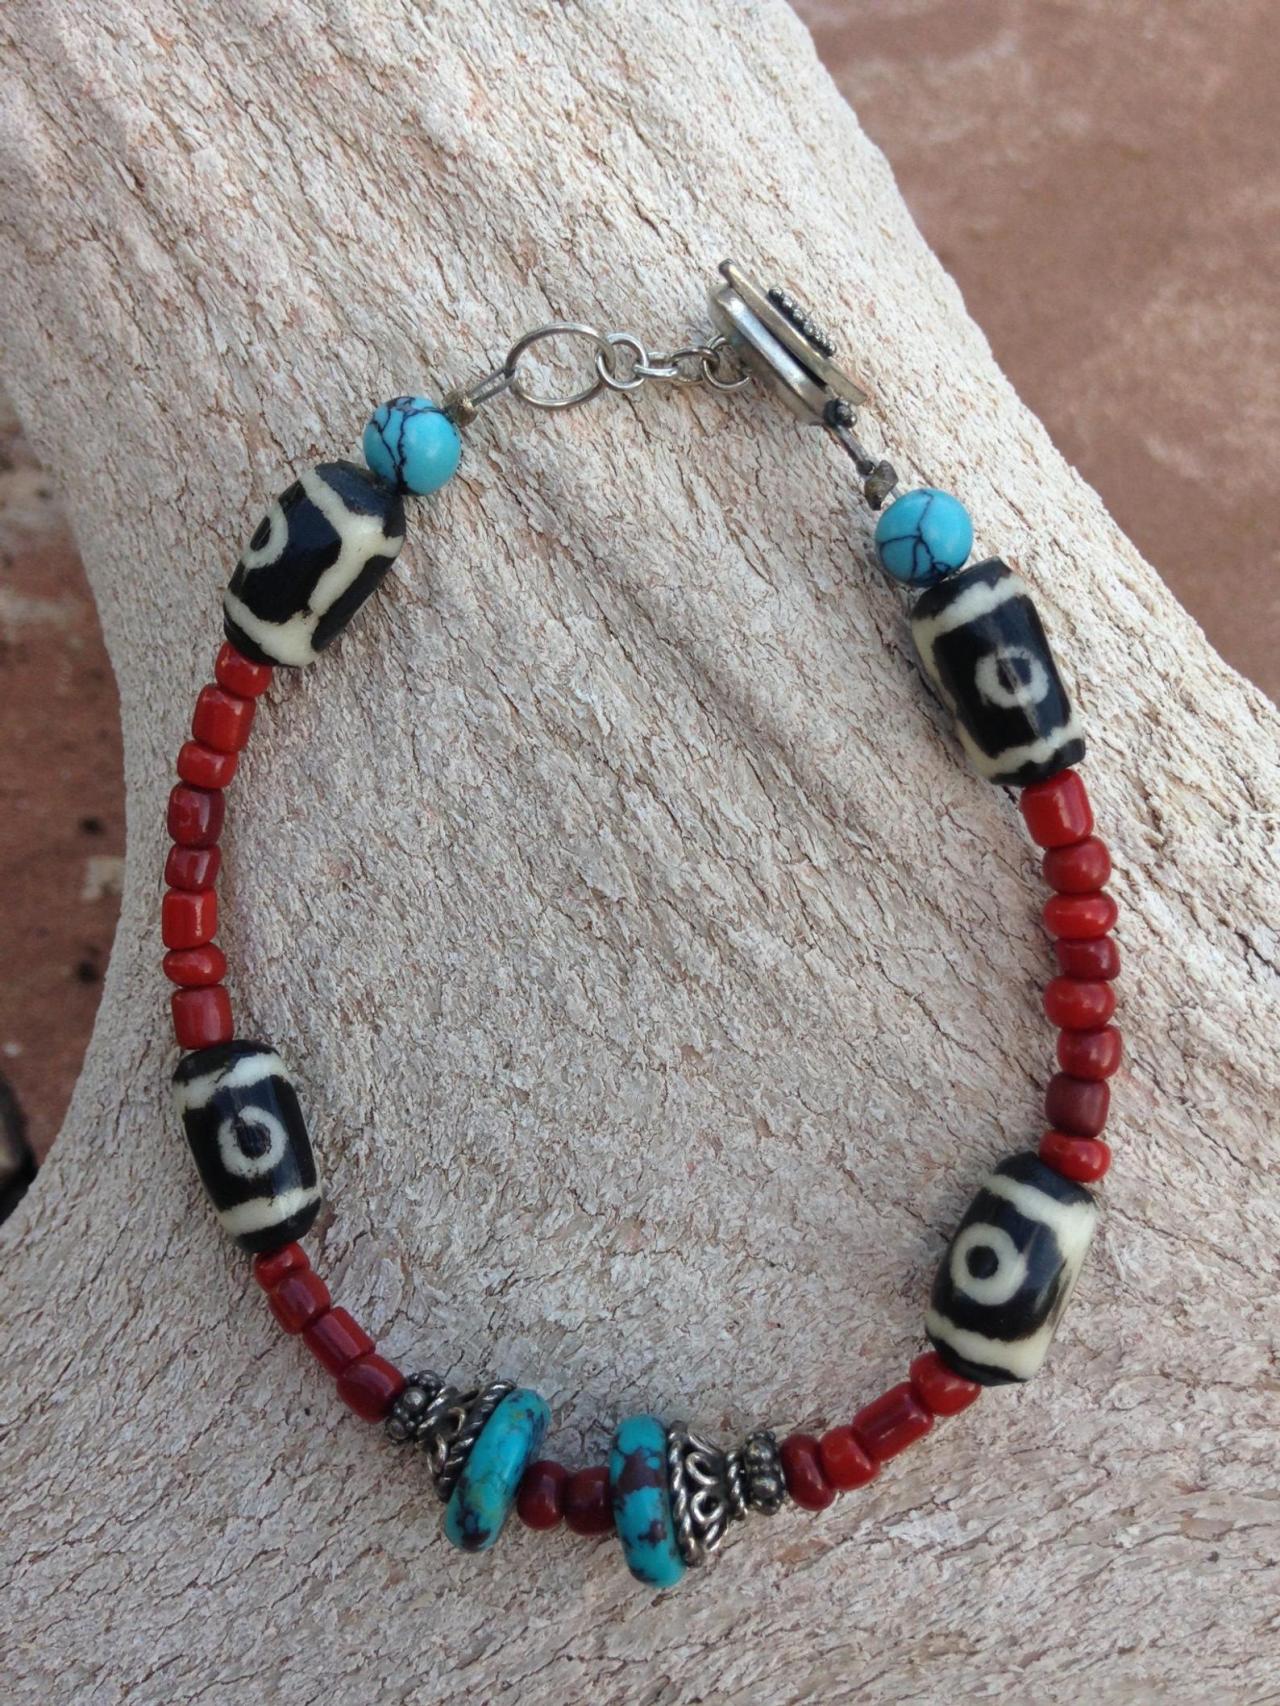 7 3/4 in Coral turquoise and painted wooden bead bracelet